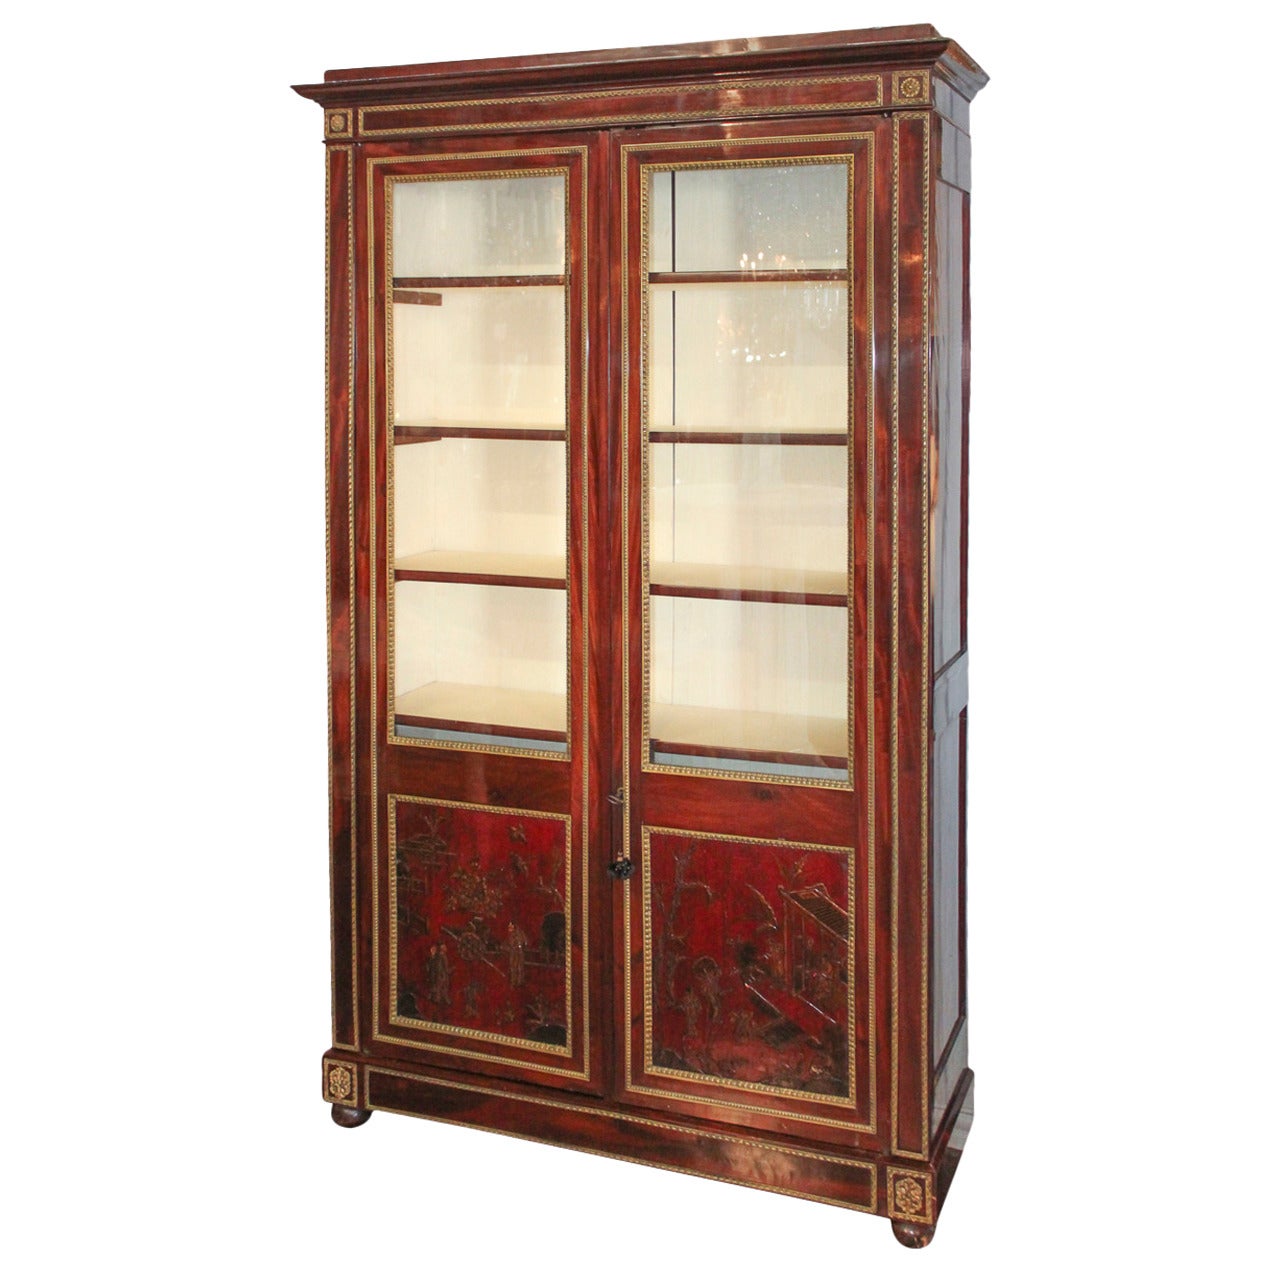 Outstanding 19th Century French Cuban Mahogany Cabinet